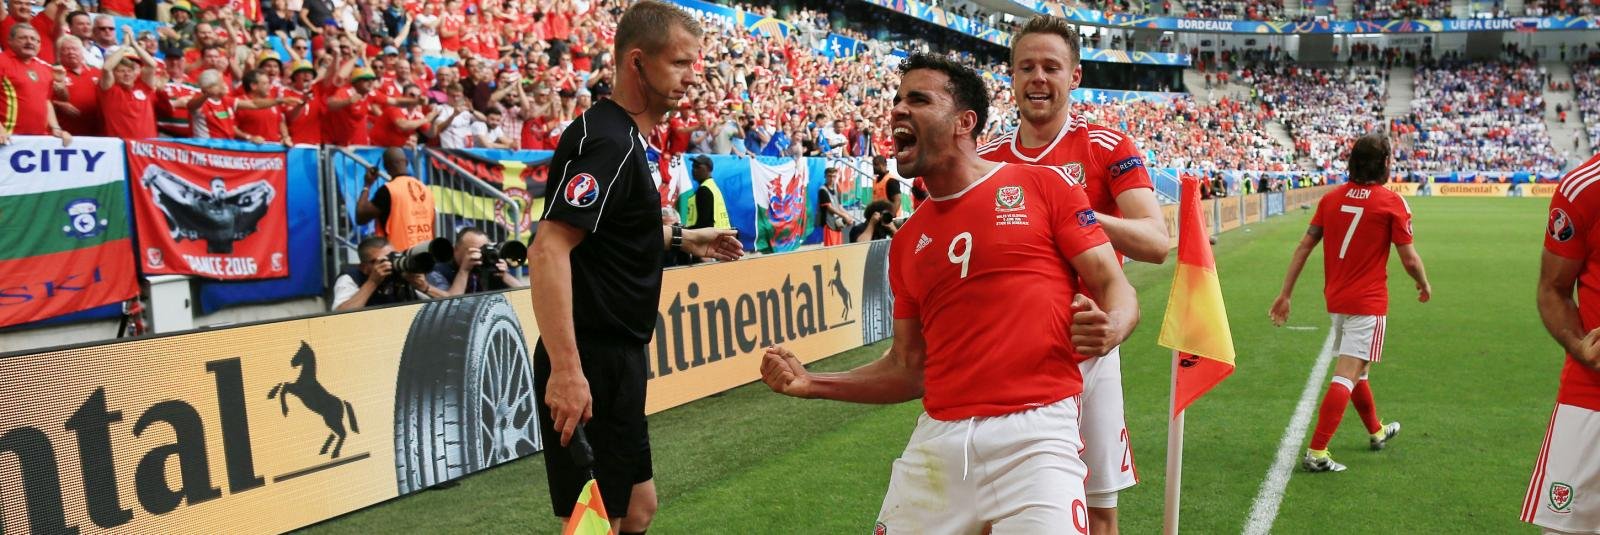 West Brom snap up Wales’ Euro 2016 star on two-year deal